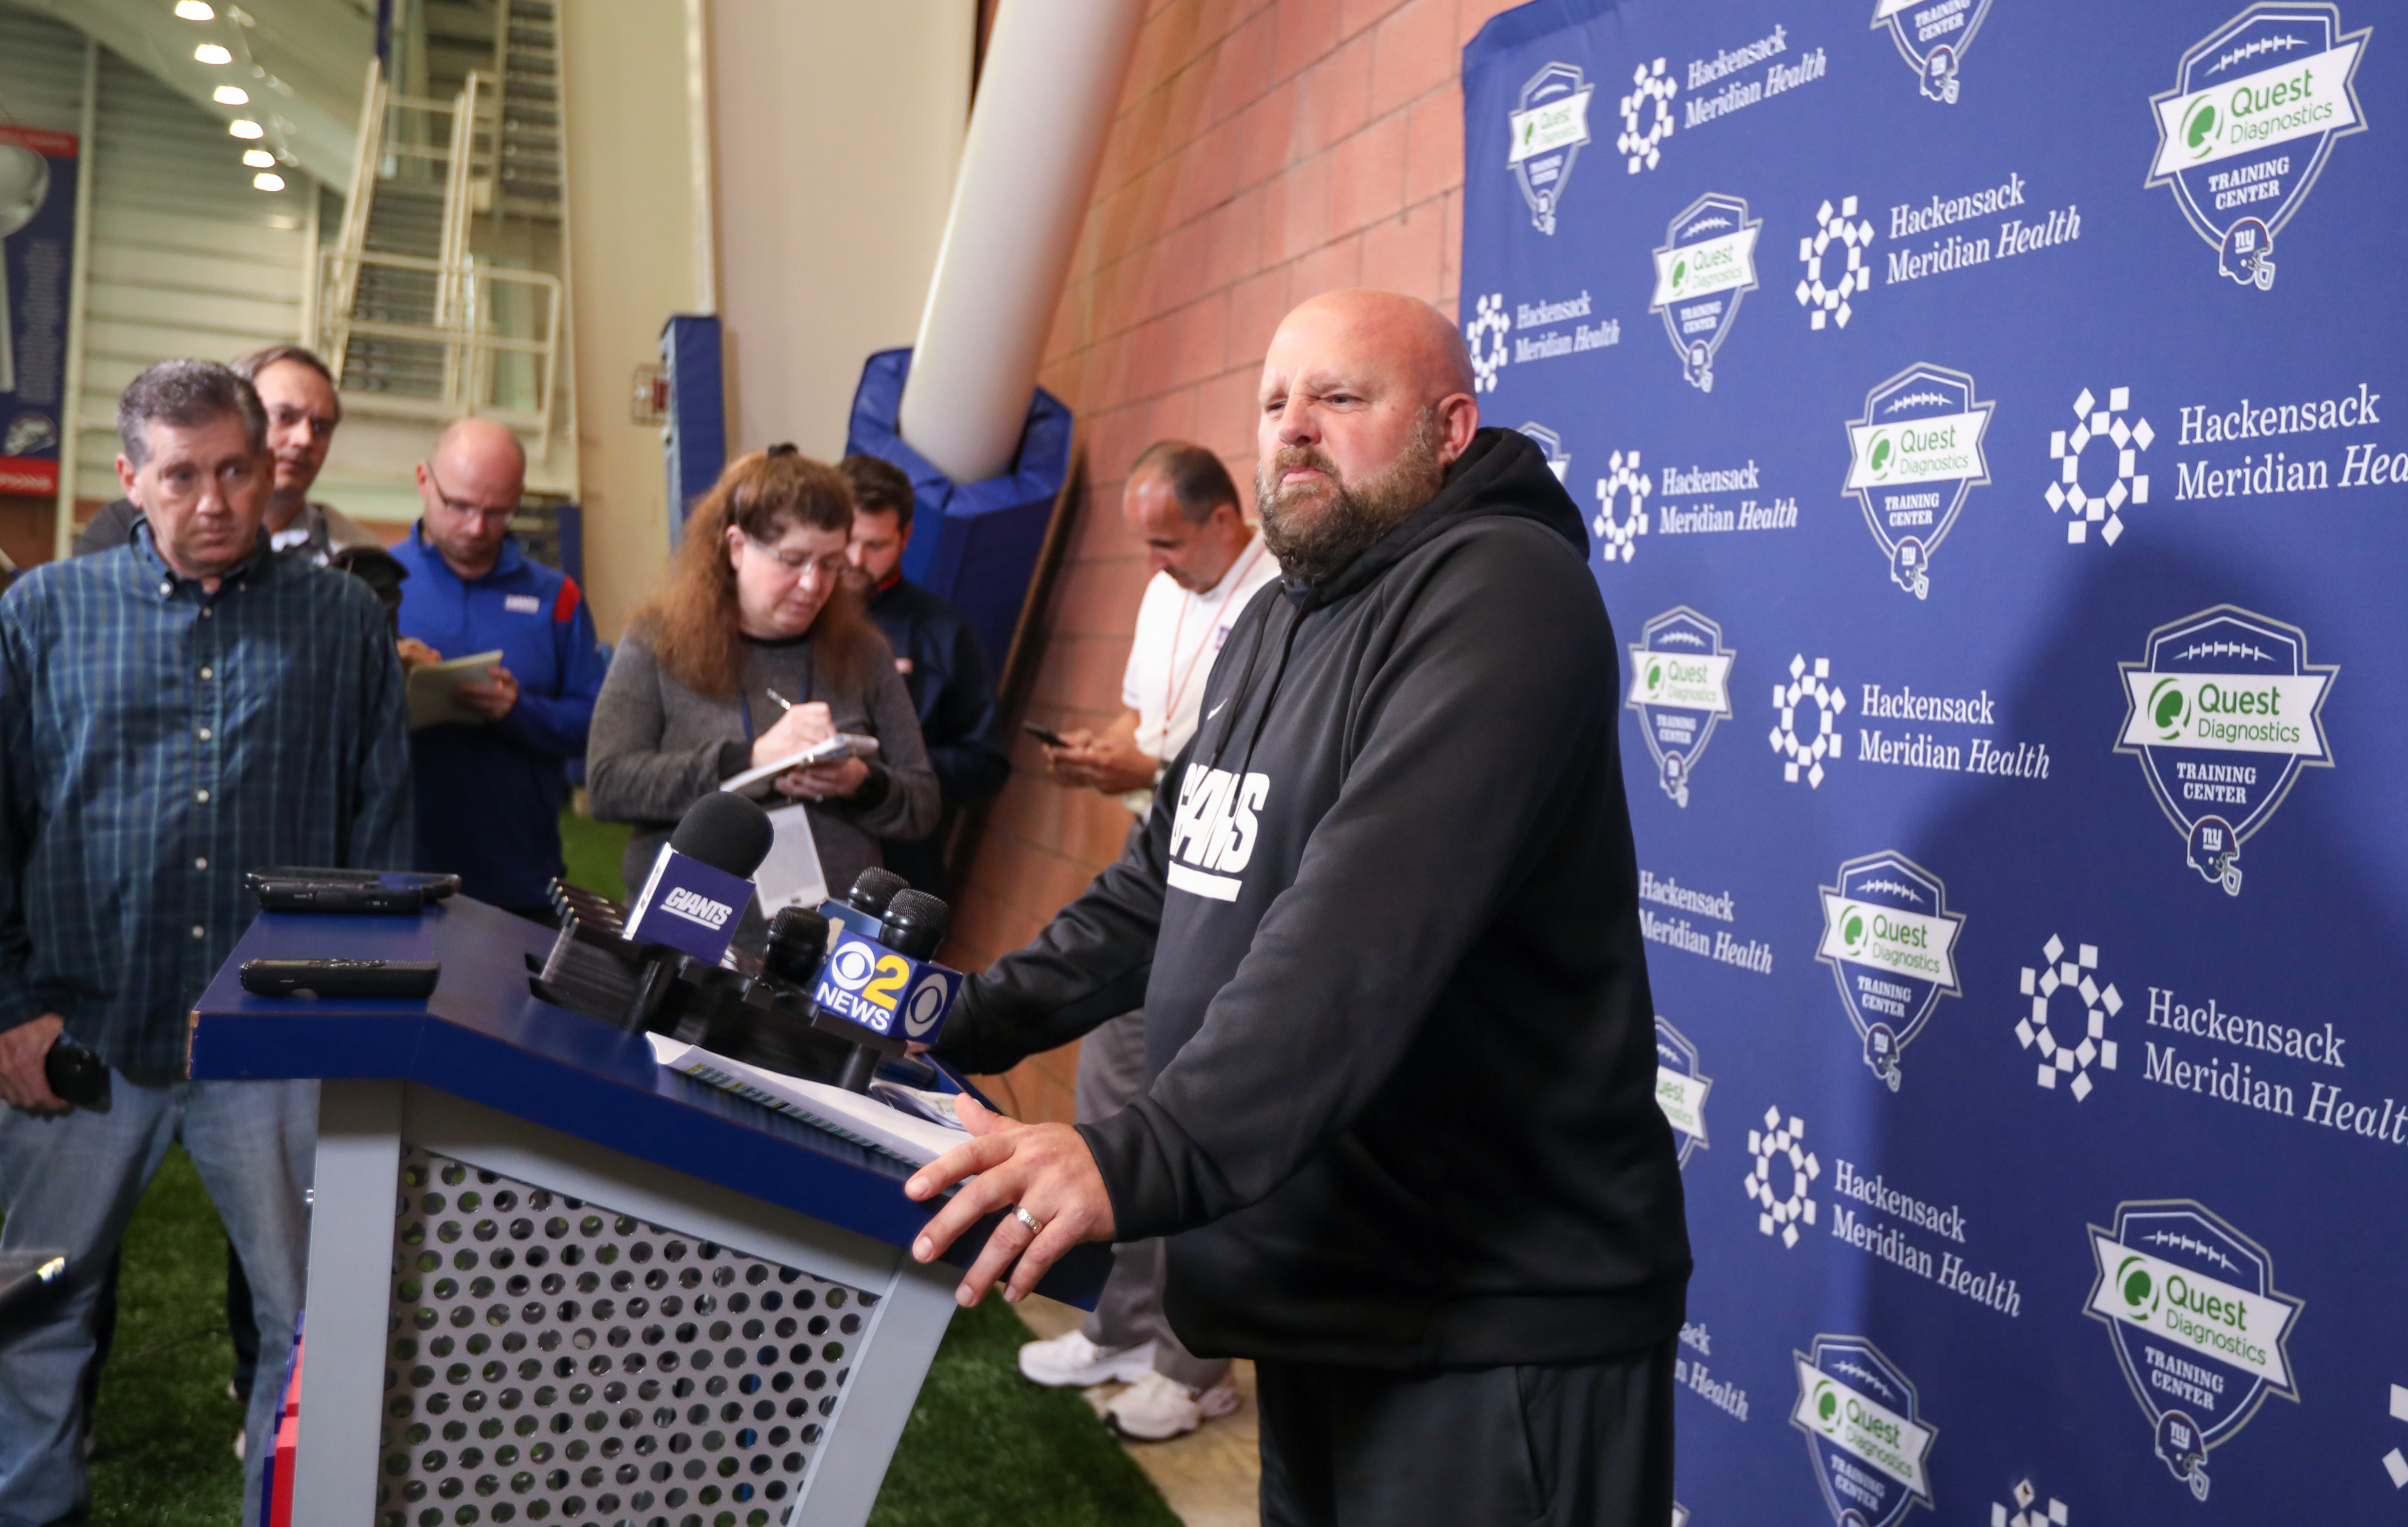 New York Giants head coach Brian Daboll speaks to the media before practice on Wednesday, Oct. 26, 2022. Daboll and the Giants (6-1) will travel to Seattle to play the Seahawks Sunday.